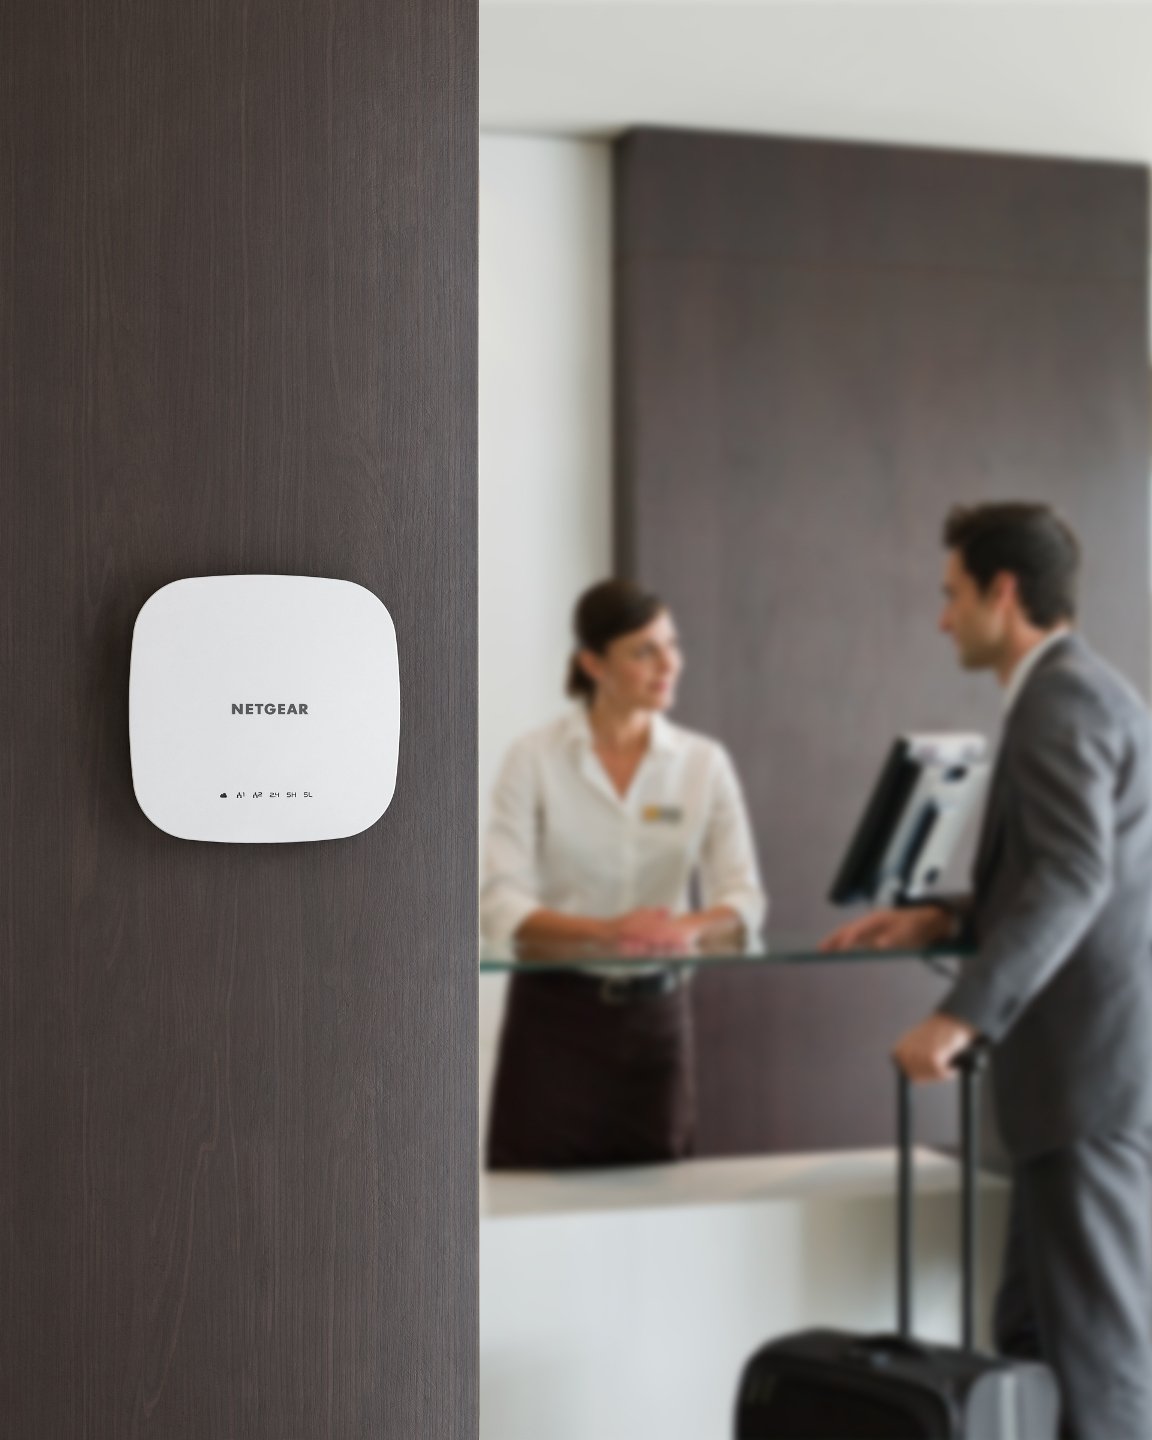 NETGEAR Pro Wi-Fi Access Points are Ideal for High-Performance Data Communications in Home or Business